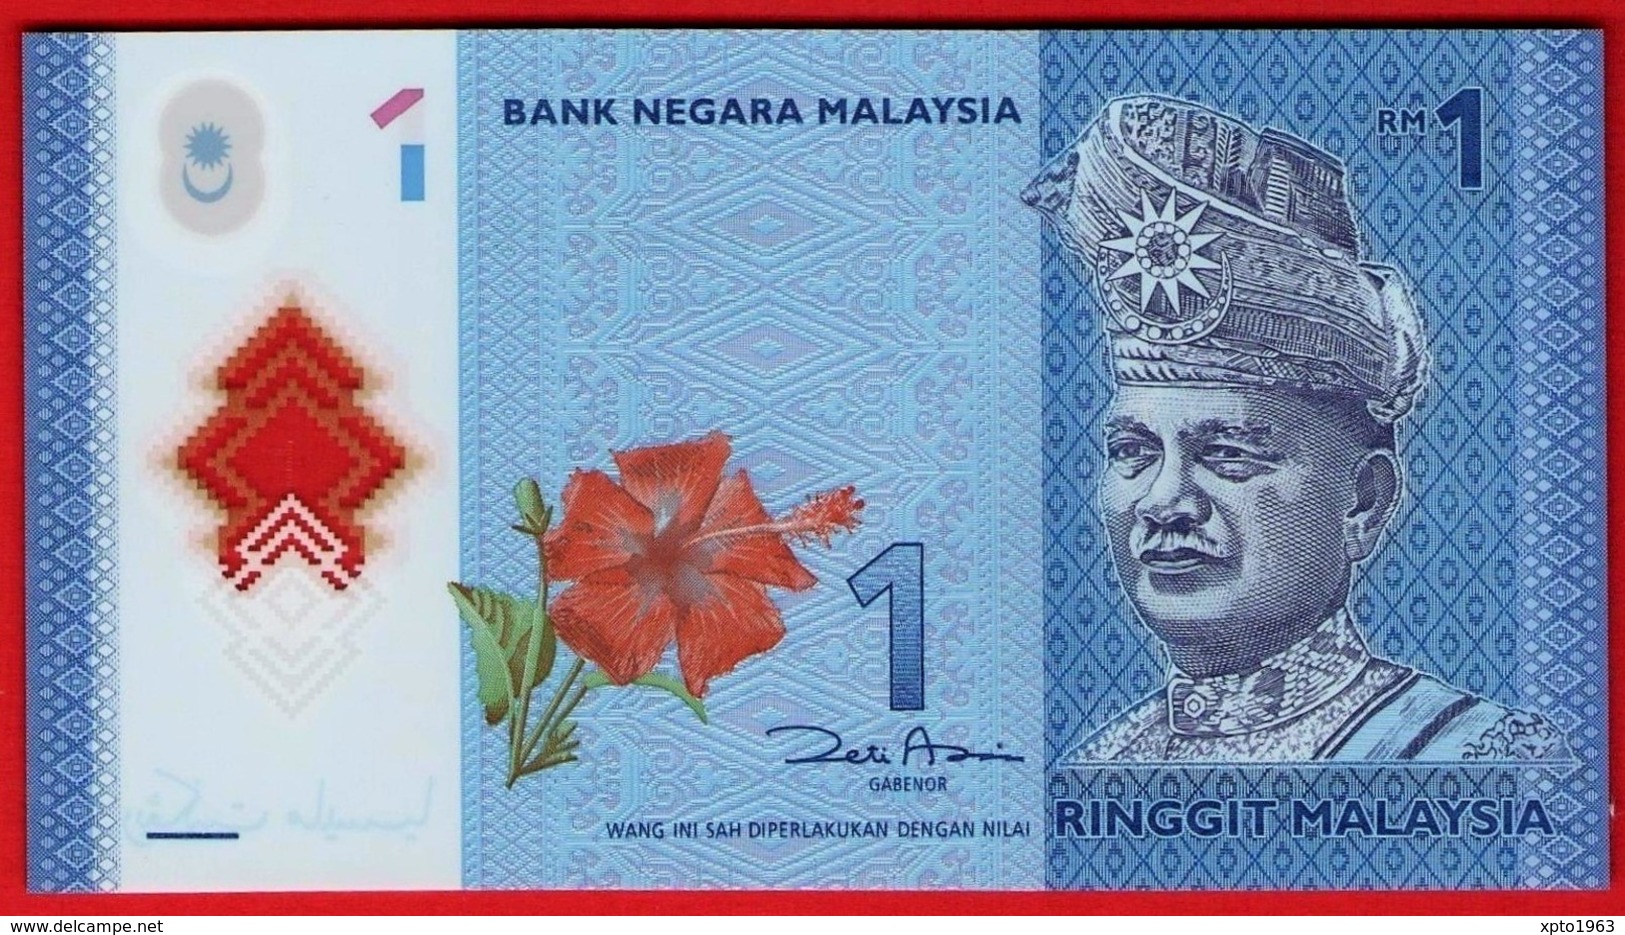 Malaysia 1 Ringgit RM1 (2012) / JC/JB SAME NUMBER 6666655 - P51 Pair - Polymer UNC FDS NEUF - Malesia